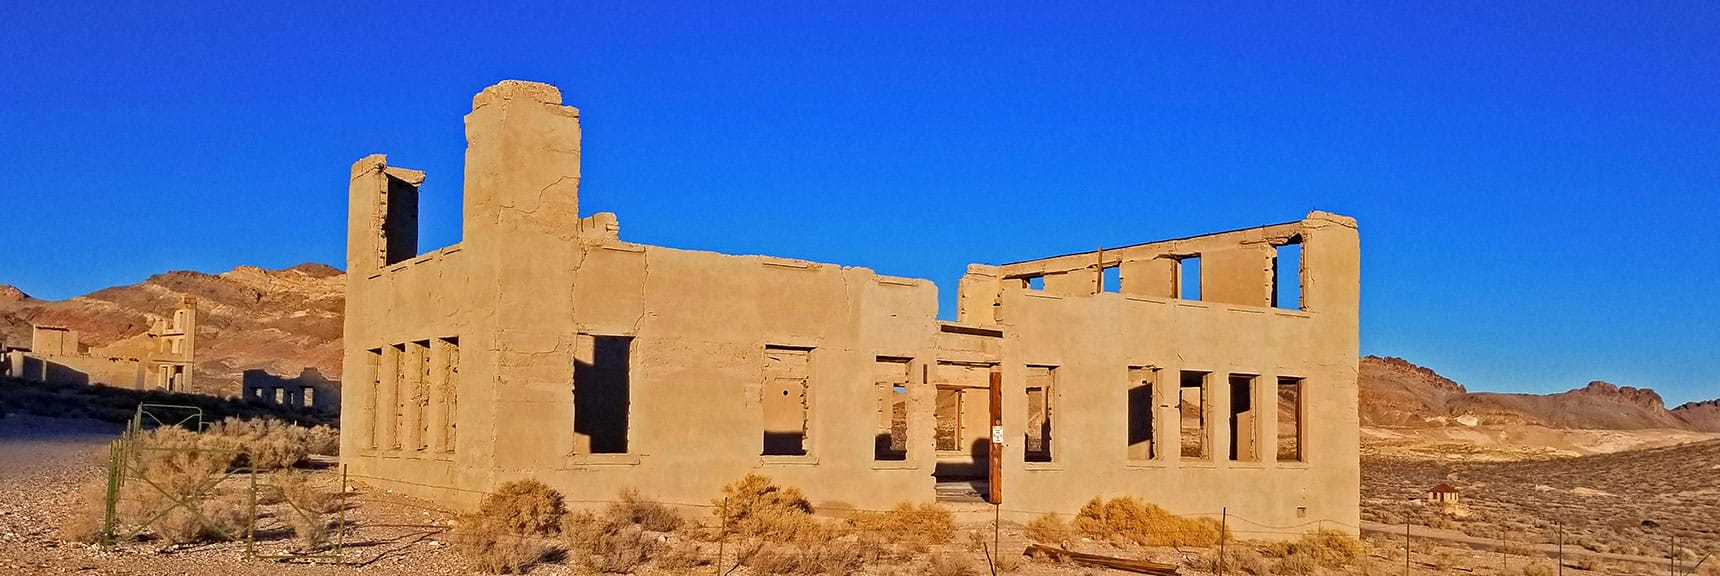 Rhyolite Schoolhouse - 250 Children at Its Height in 1906 and 1907 | Rhyolite Ghost Town | Death Valley Area, Nevada